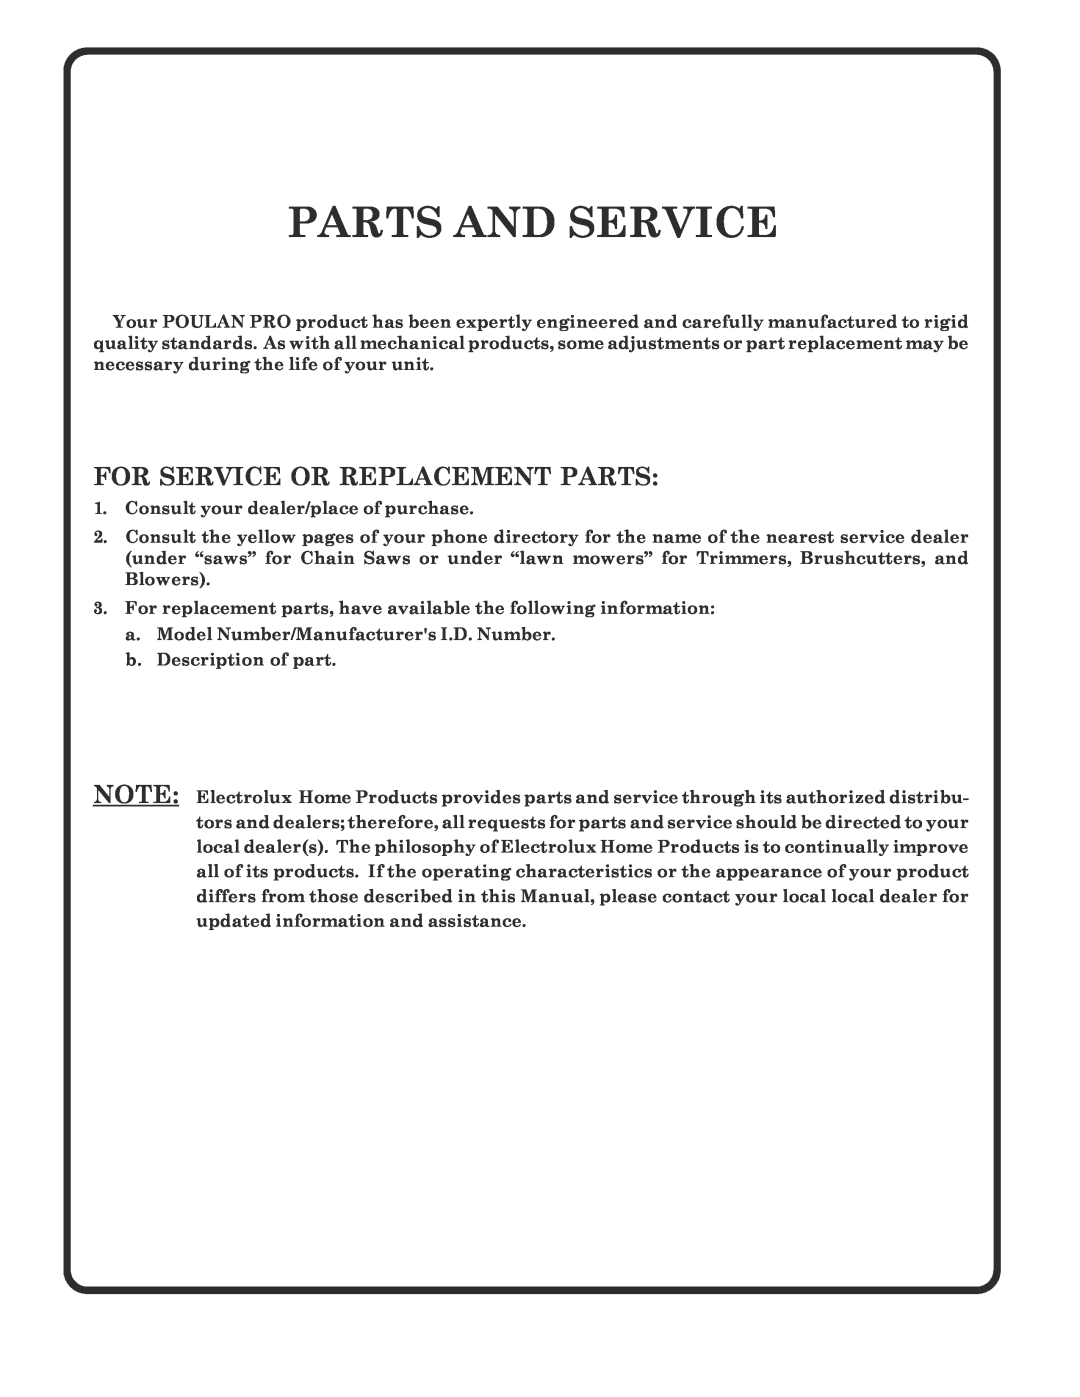 Poulan PR185H42STH owner manual Parts And Service, For Service Or Replacement Parts 